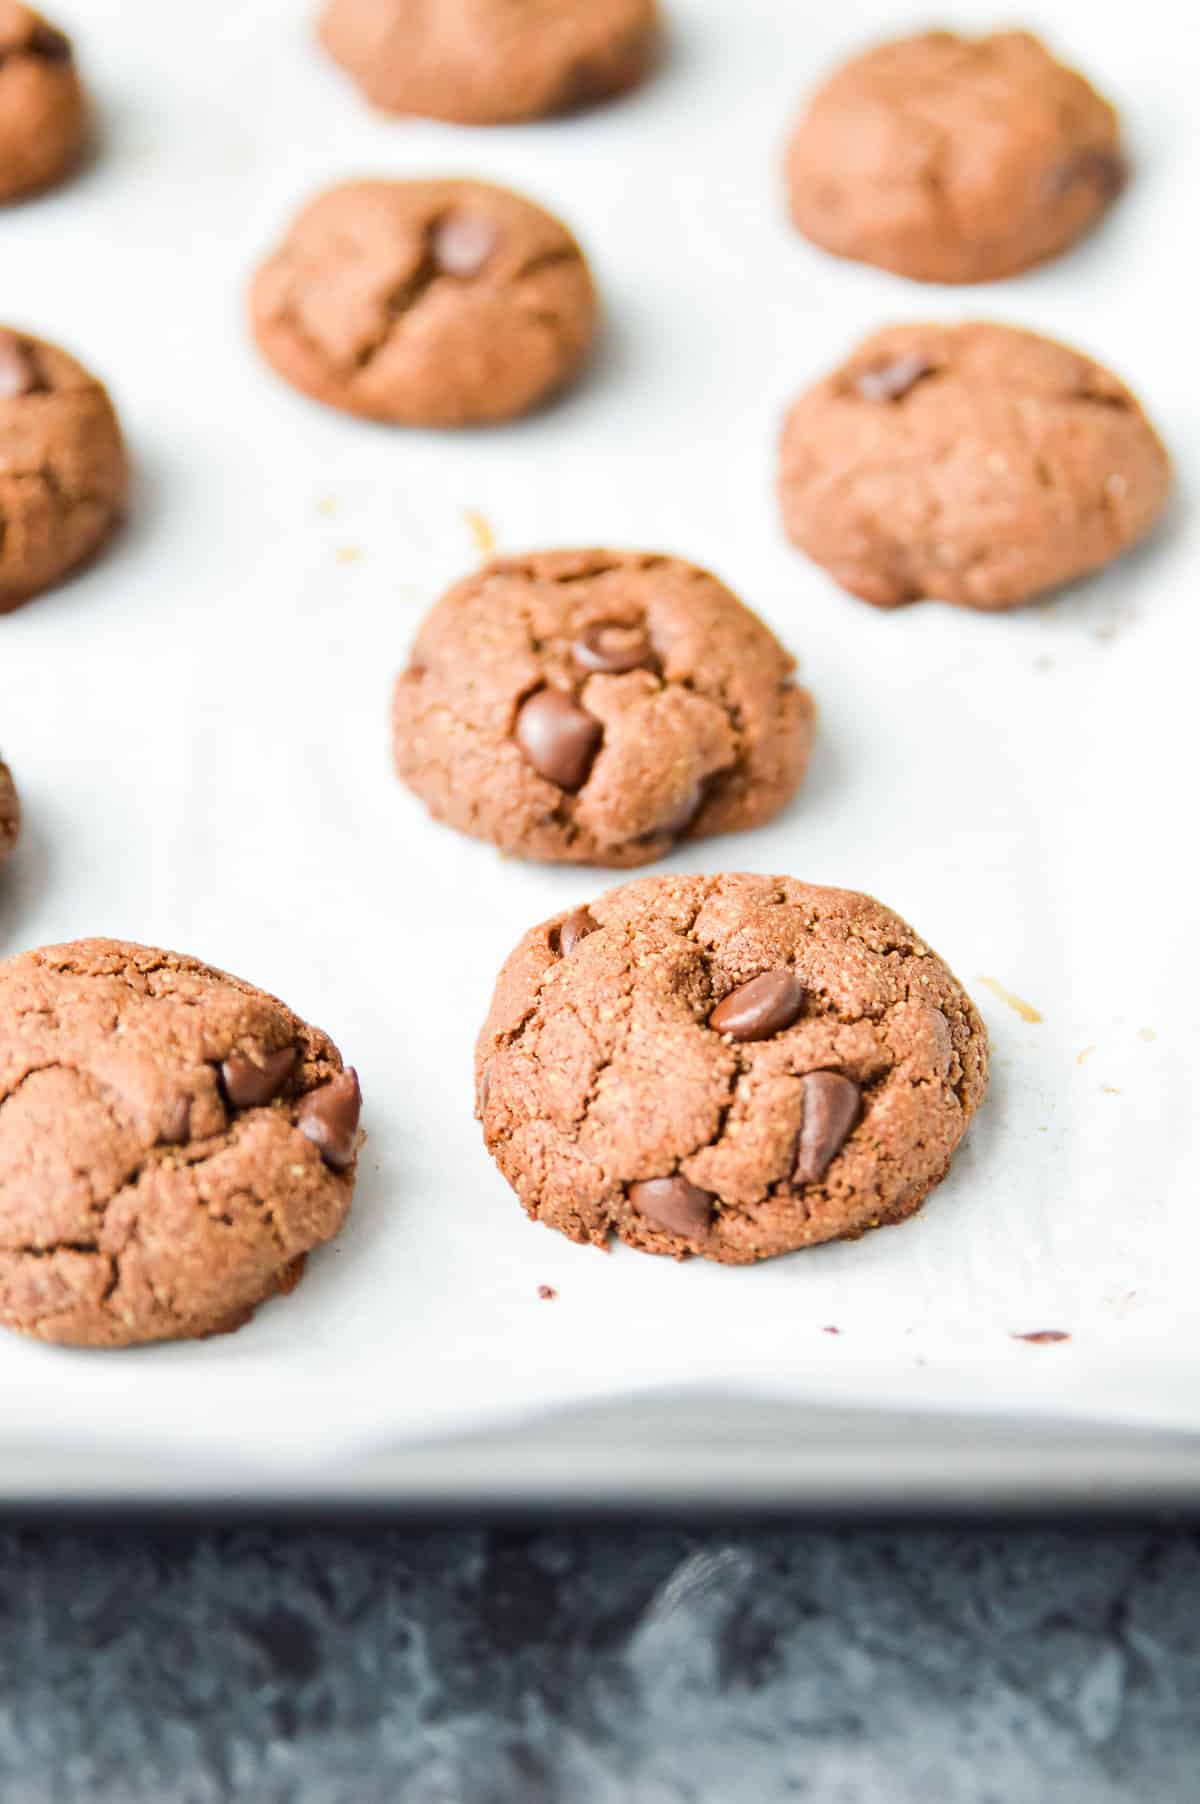 Paleo Double Chocolate Fudge Cookies. Do I even need to say more? These chocolate cookies make the perfect grain free treat. Pair these double chocolate cookies with a glass of dairy free milk and I can't think of anything better! #paleo #cookie #chocolate #glutenfree #dairyfree #fudge #chocolatechip